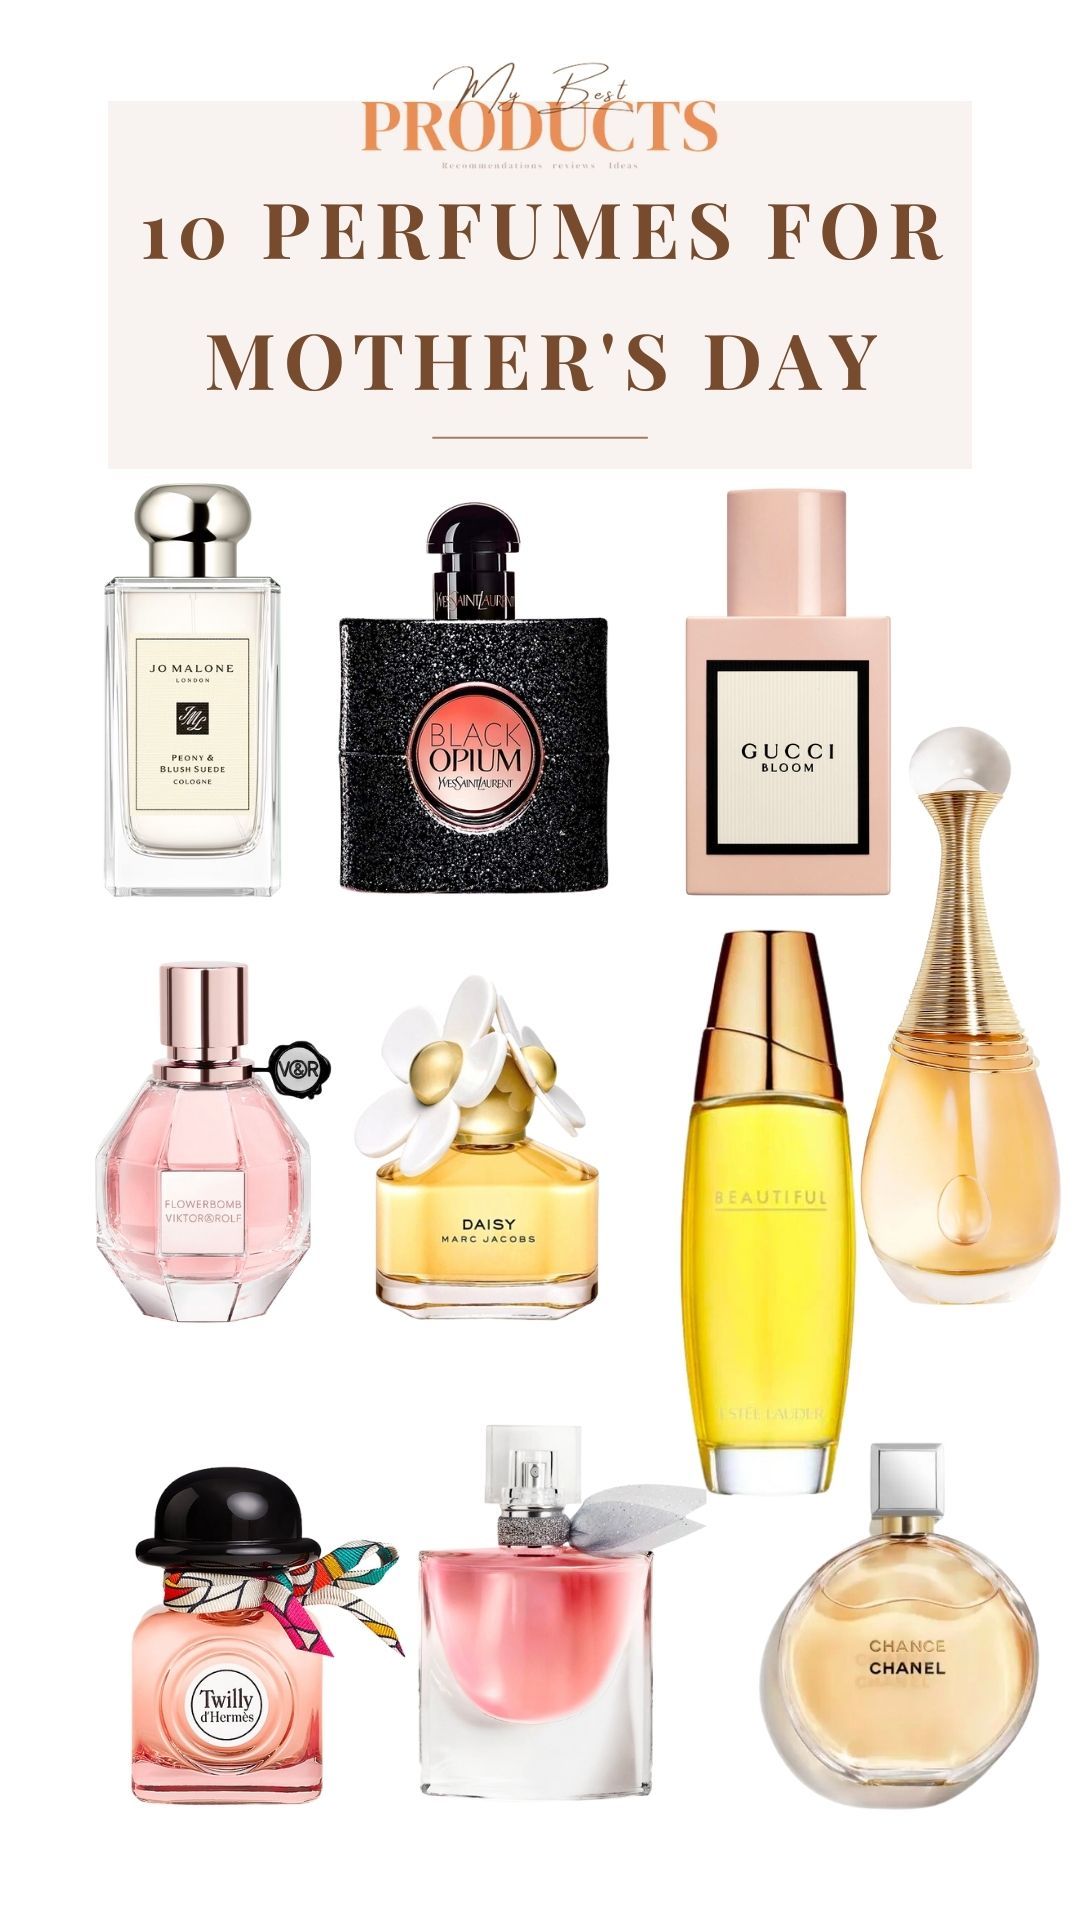 Top 10 Best Perfumes for Mother's Day Gifts